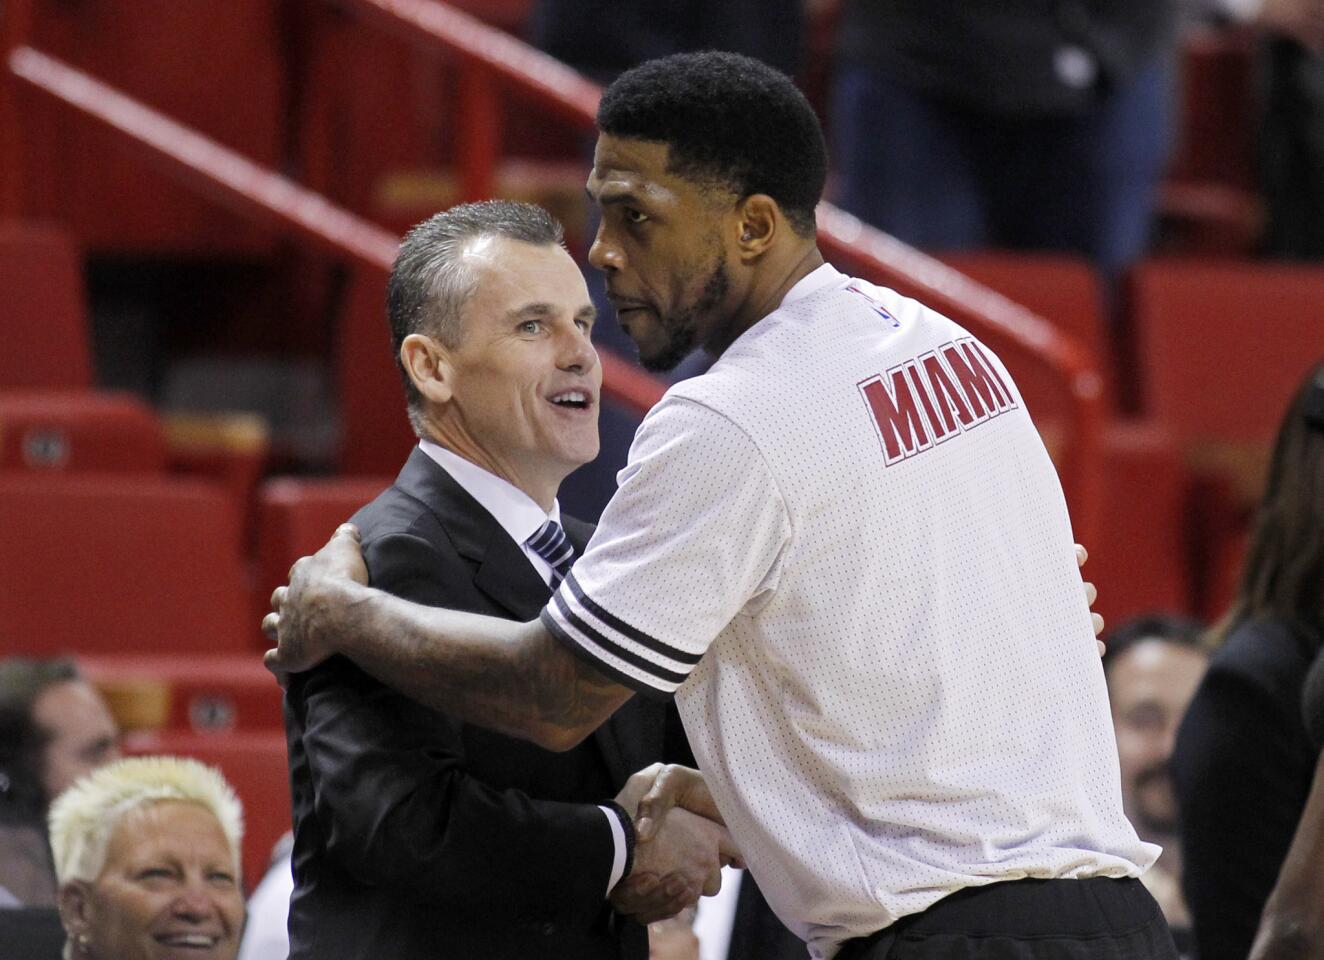 Oklahoma City Thunder head coach Billy Donovan greets Miami Heat forward Udonis Haslem (40), one of his former University of Florida players, before the teams met in an NBA basketball game, Thursday, Dec. 3, 2015, in Miami. (AP Photo/Joe Skipper)